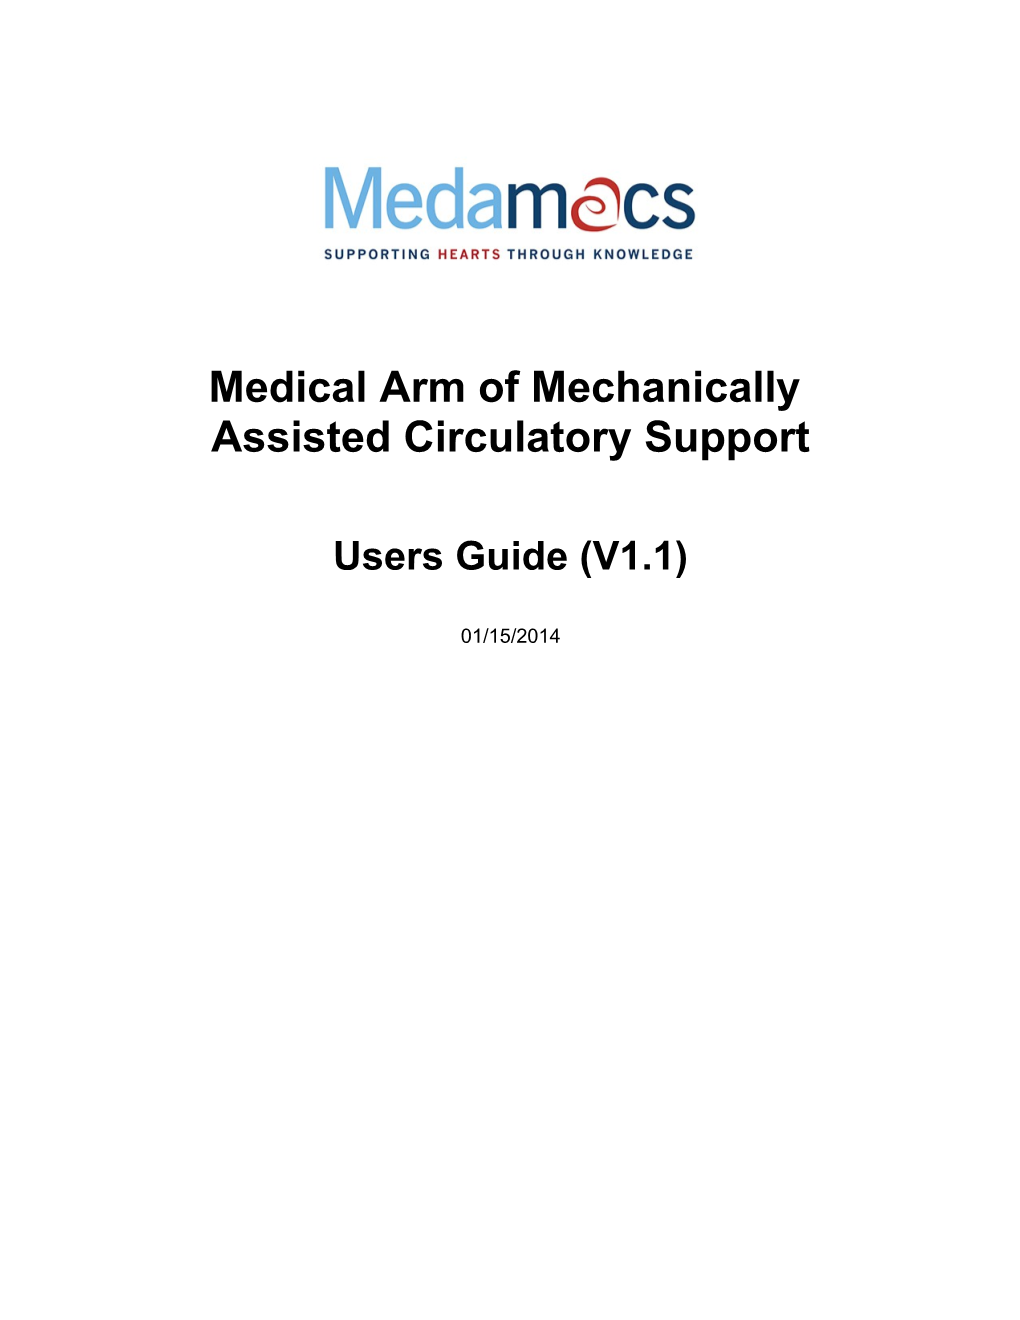 Medical Arm of Mechanically Assisted Circulatory Support